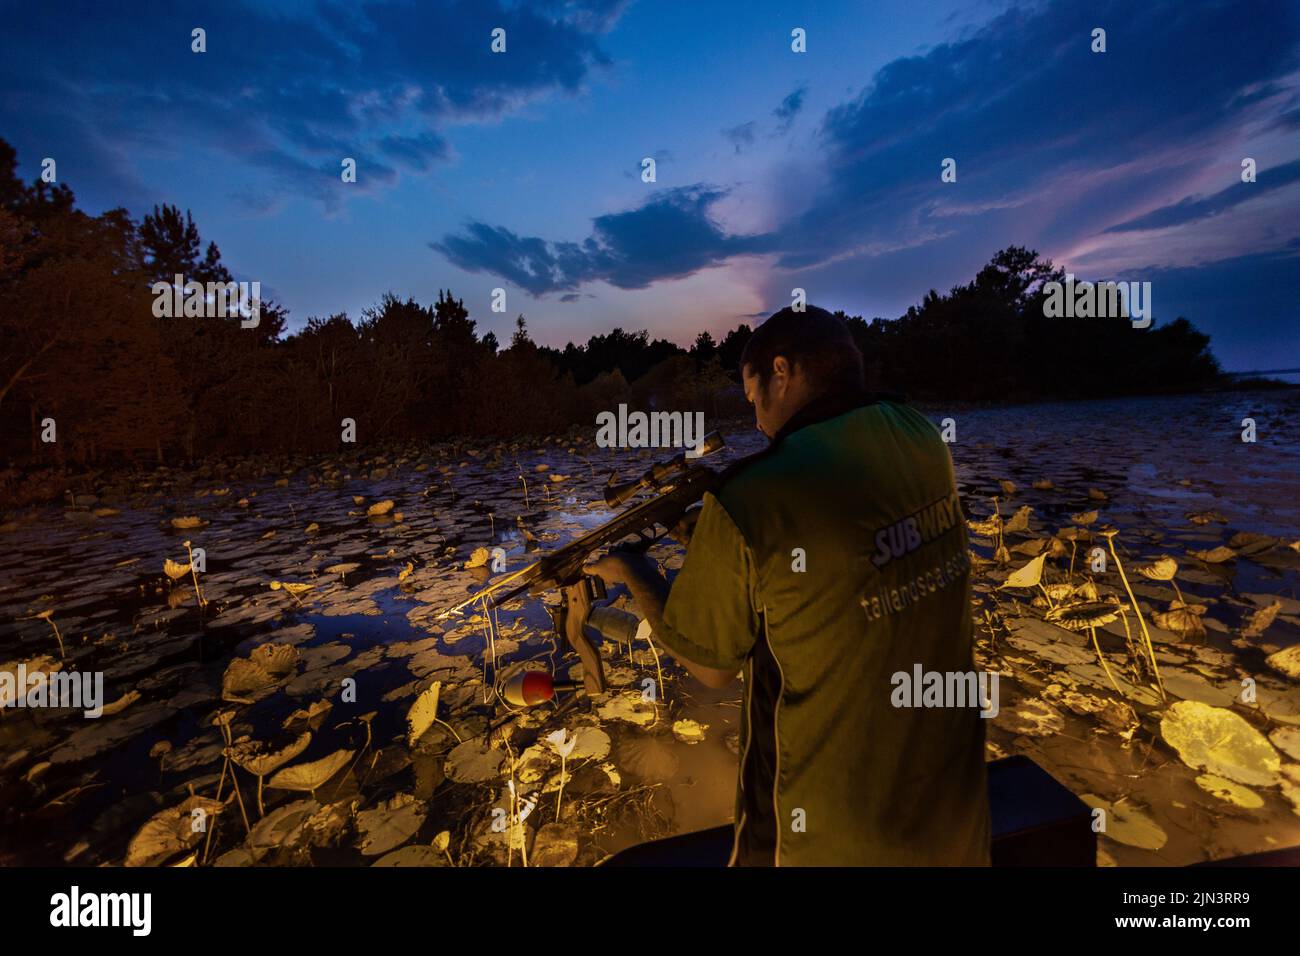 An alligator hunting guide takes aim at an alligator hiding under lily pads on Lake Marion lit by underwater lights during a nighttime gator hunting expedition in Bowman, South Carolina. Alligator hunting in South Carolina is limited by lottery and a four-week season once a year. Stock Photo